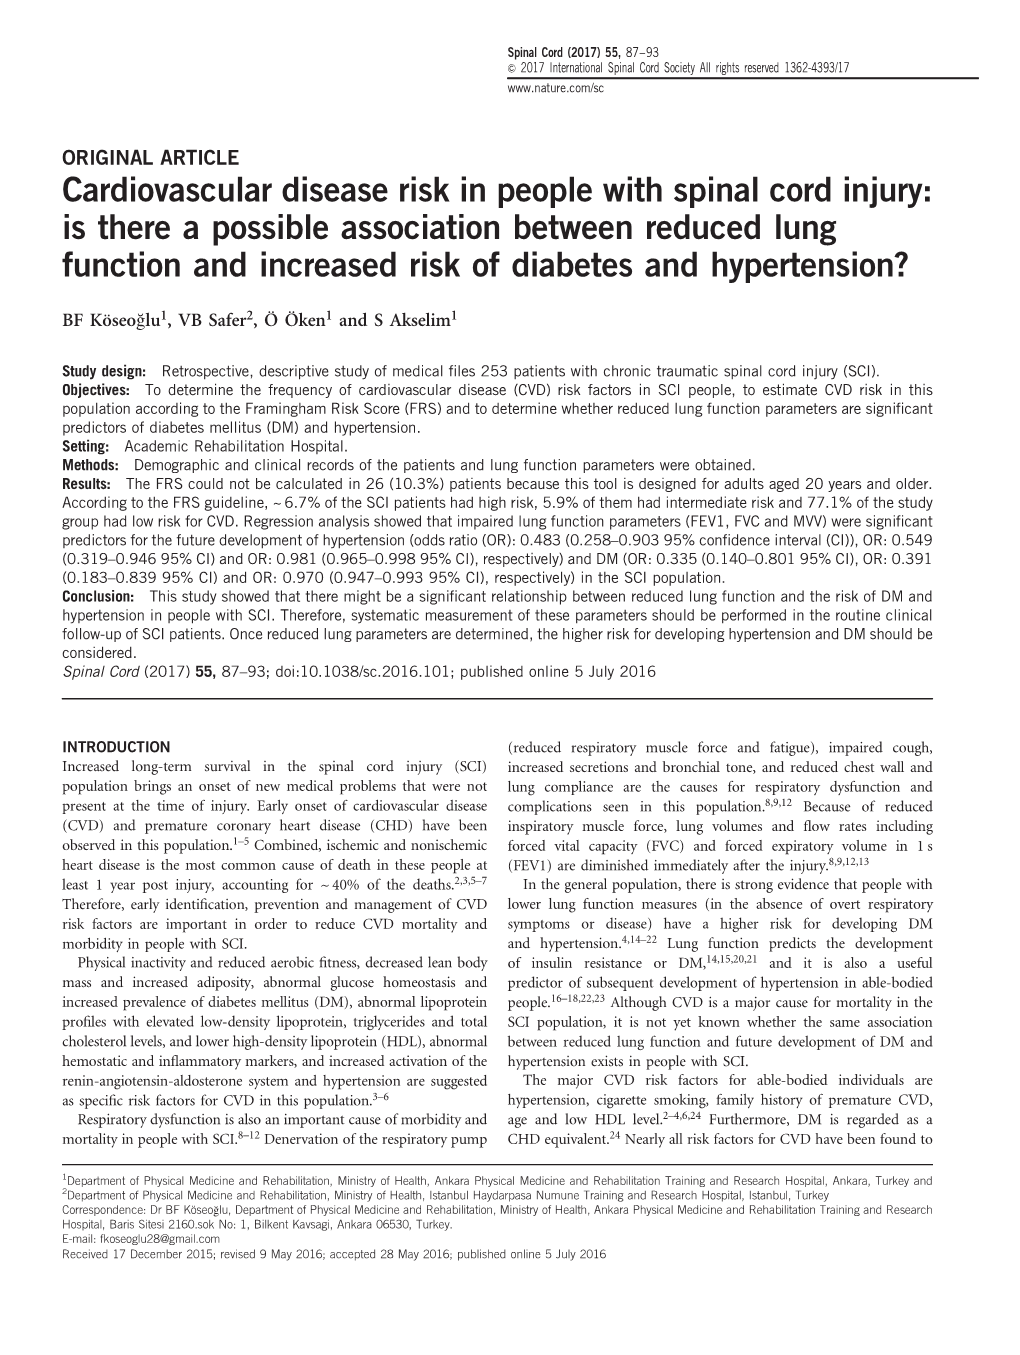 Cardiovascular Disease Risk in People with Spinal Cord Injury